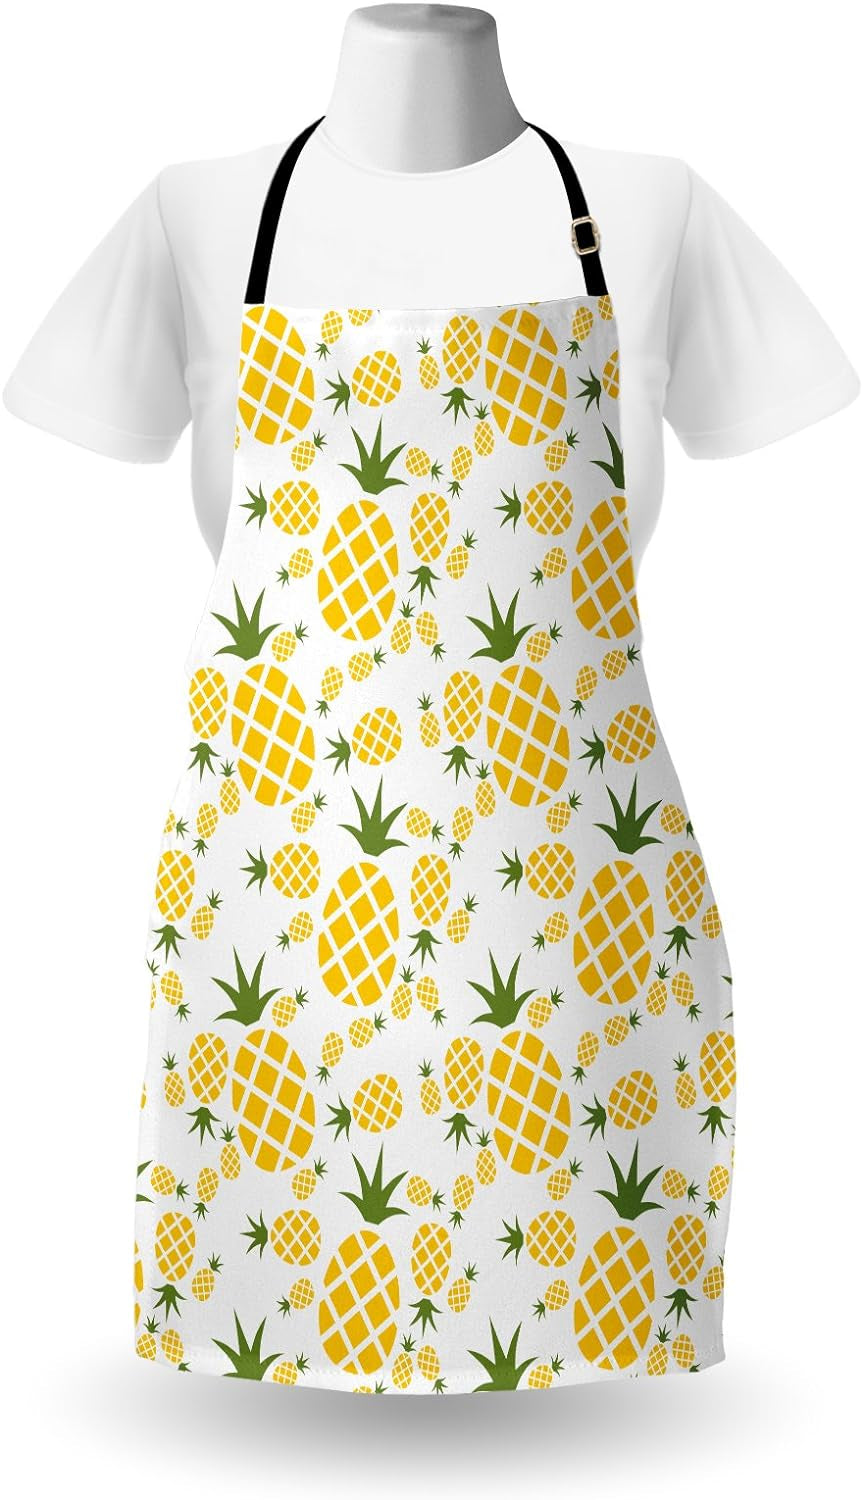 Pineapple Apron with Adjustable Neck for Cooking, Adult Size